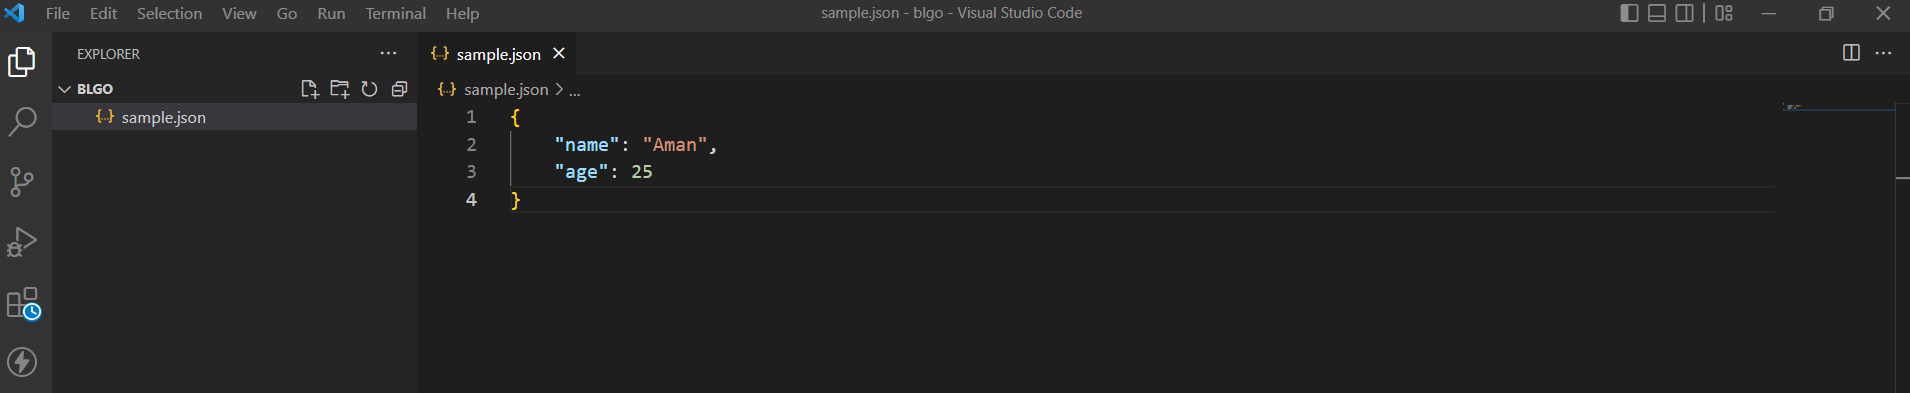 image of vscode showing a json file